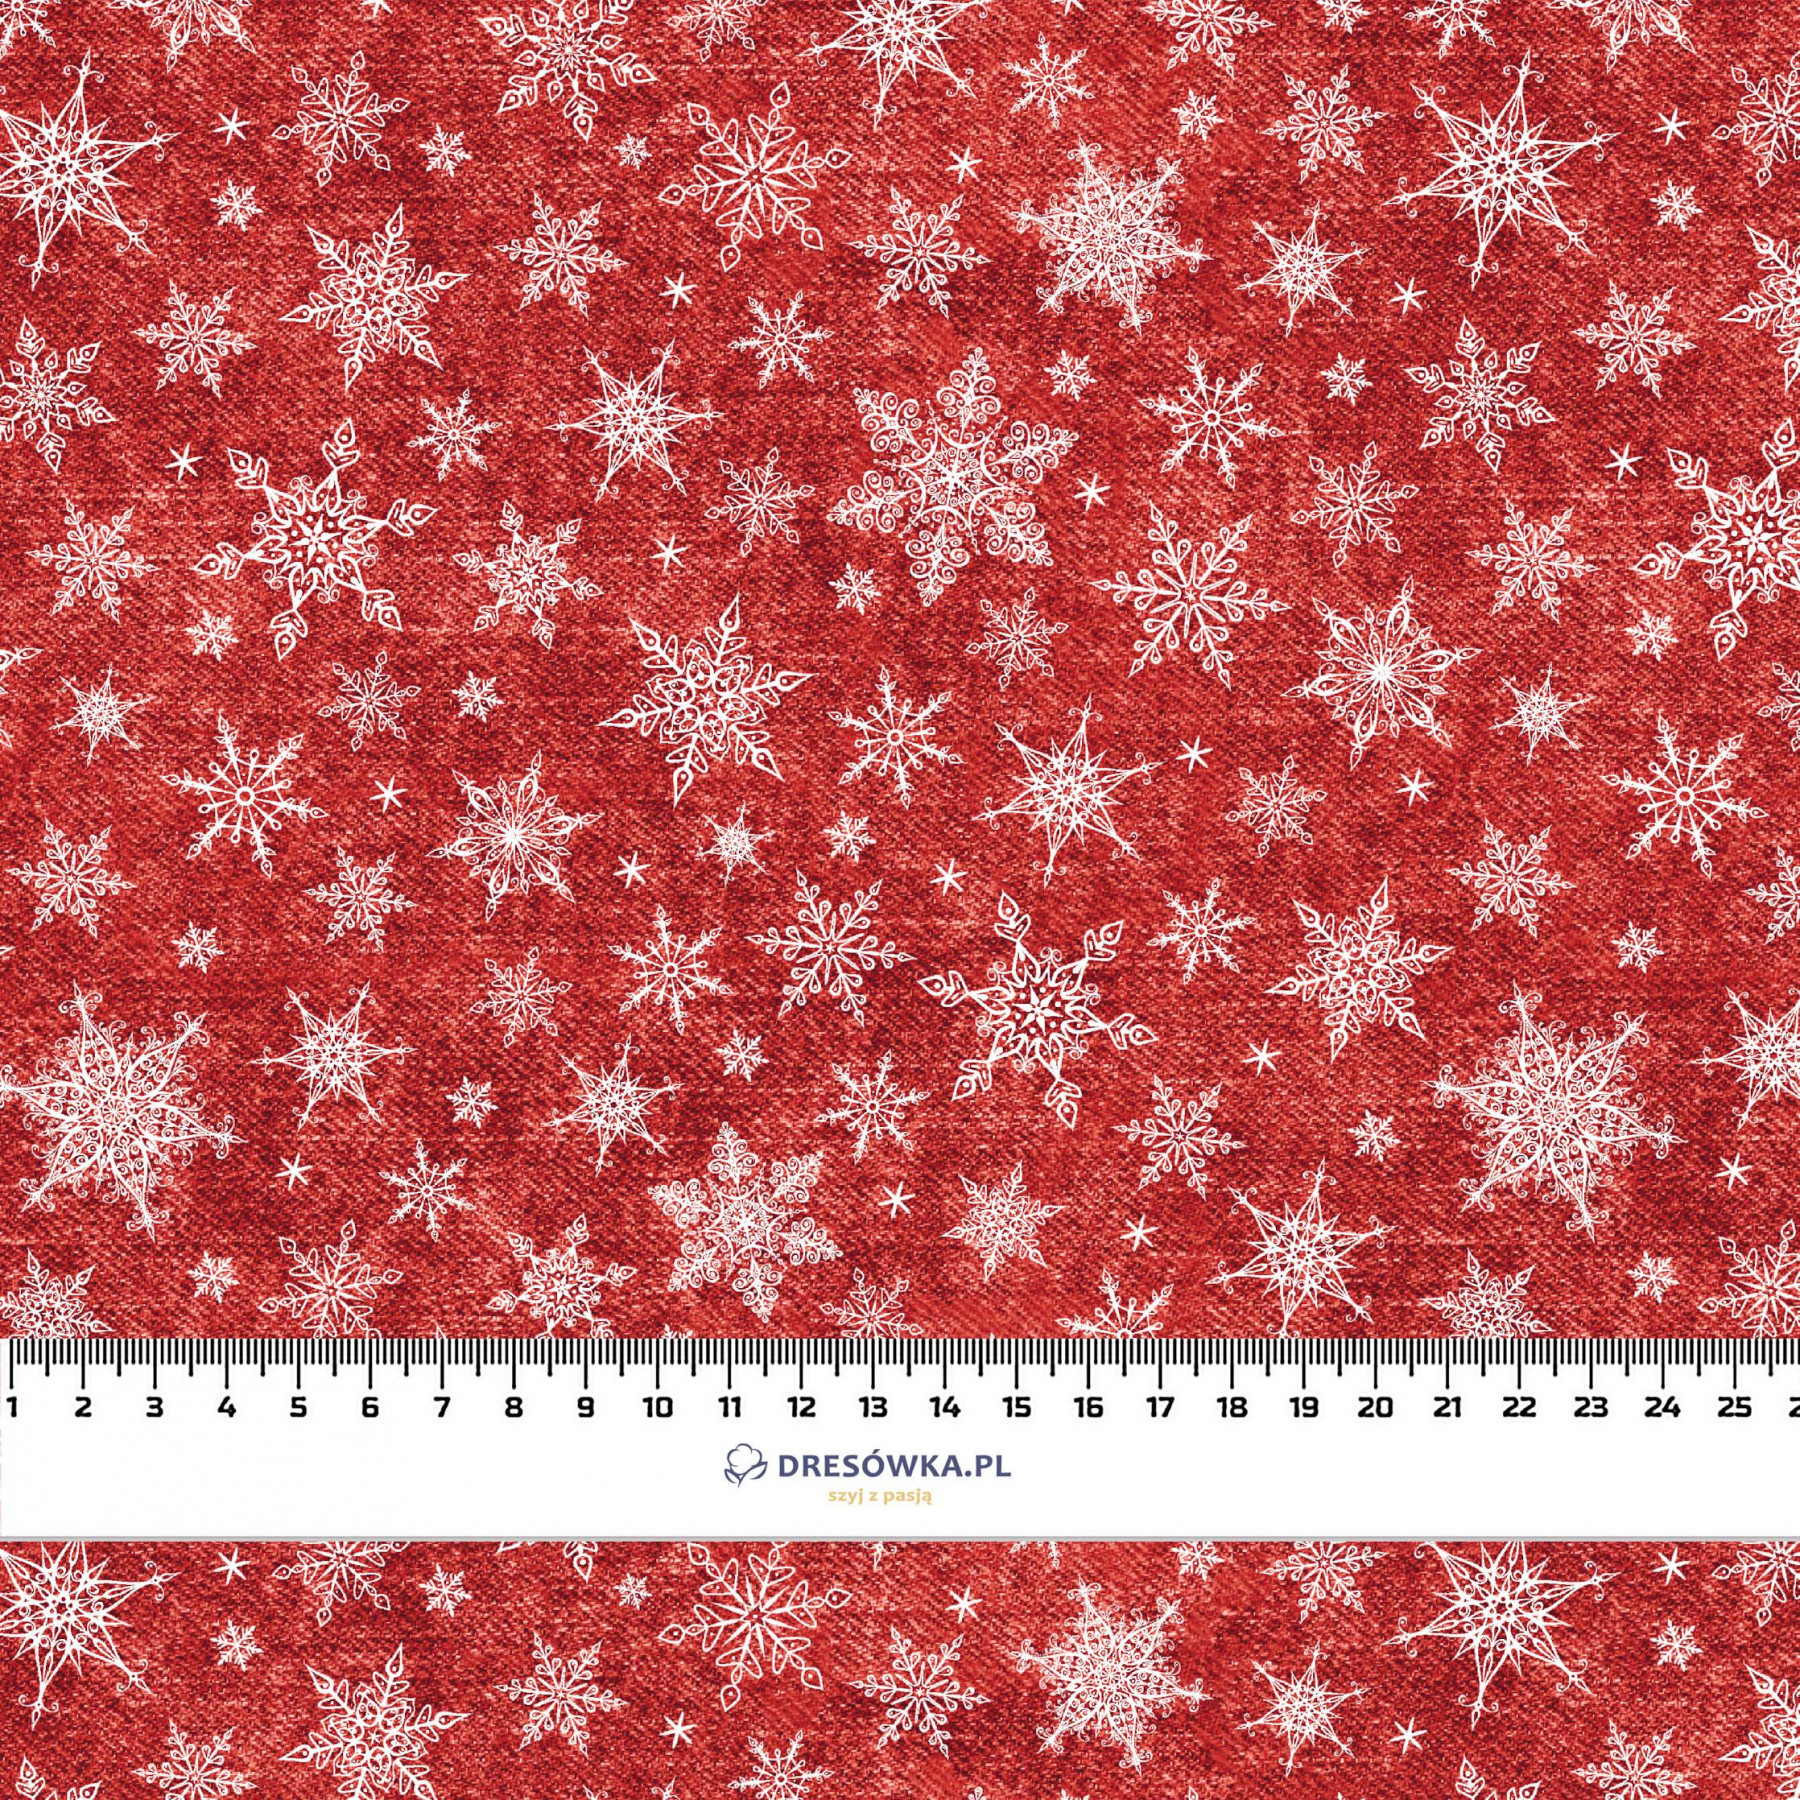 SNOWFLAKES PAT. 2 / ACID WASH RED - Woven Fabric for tablecloths